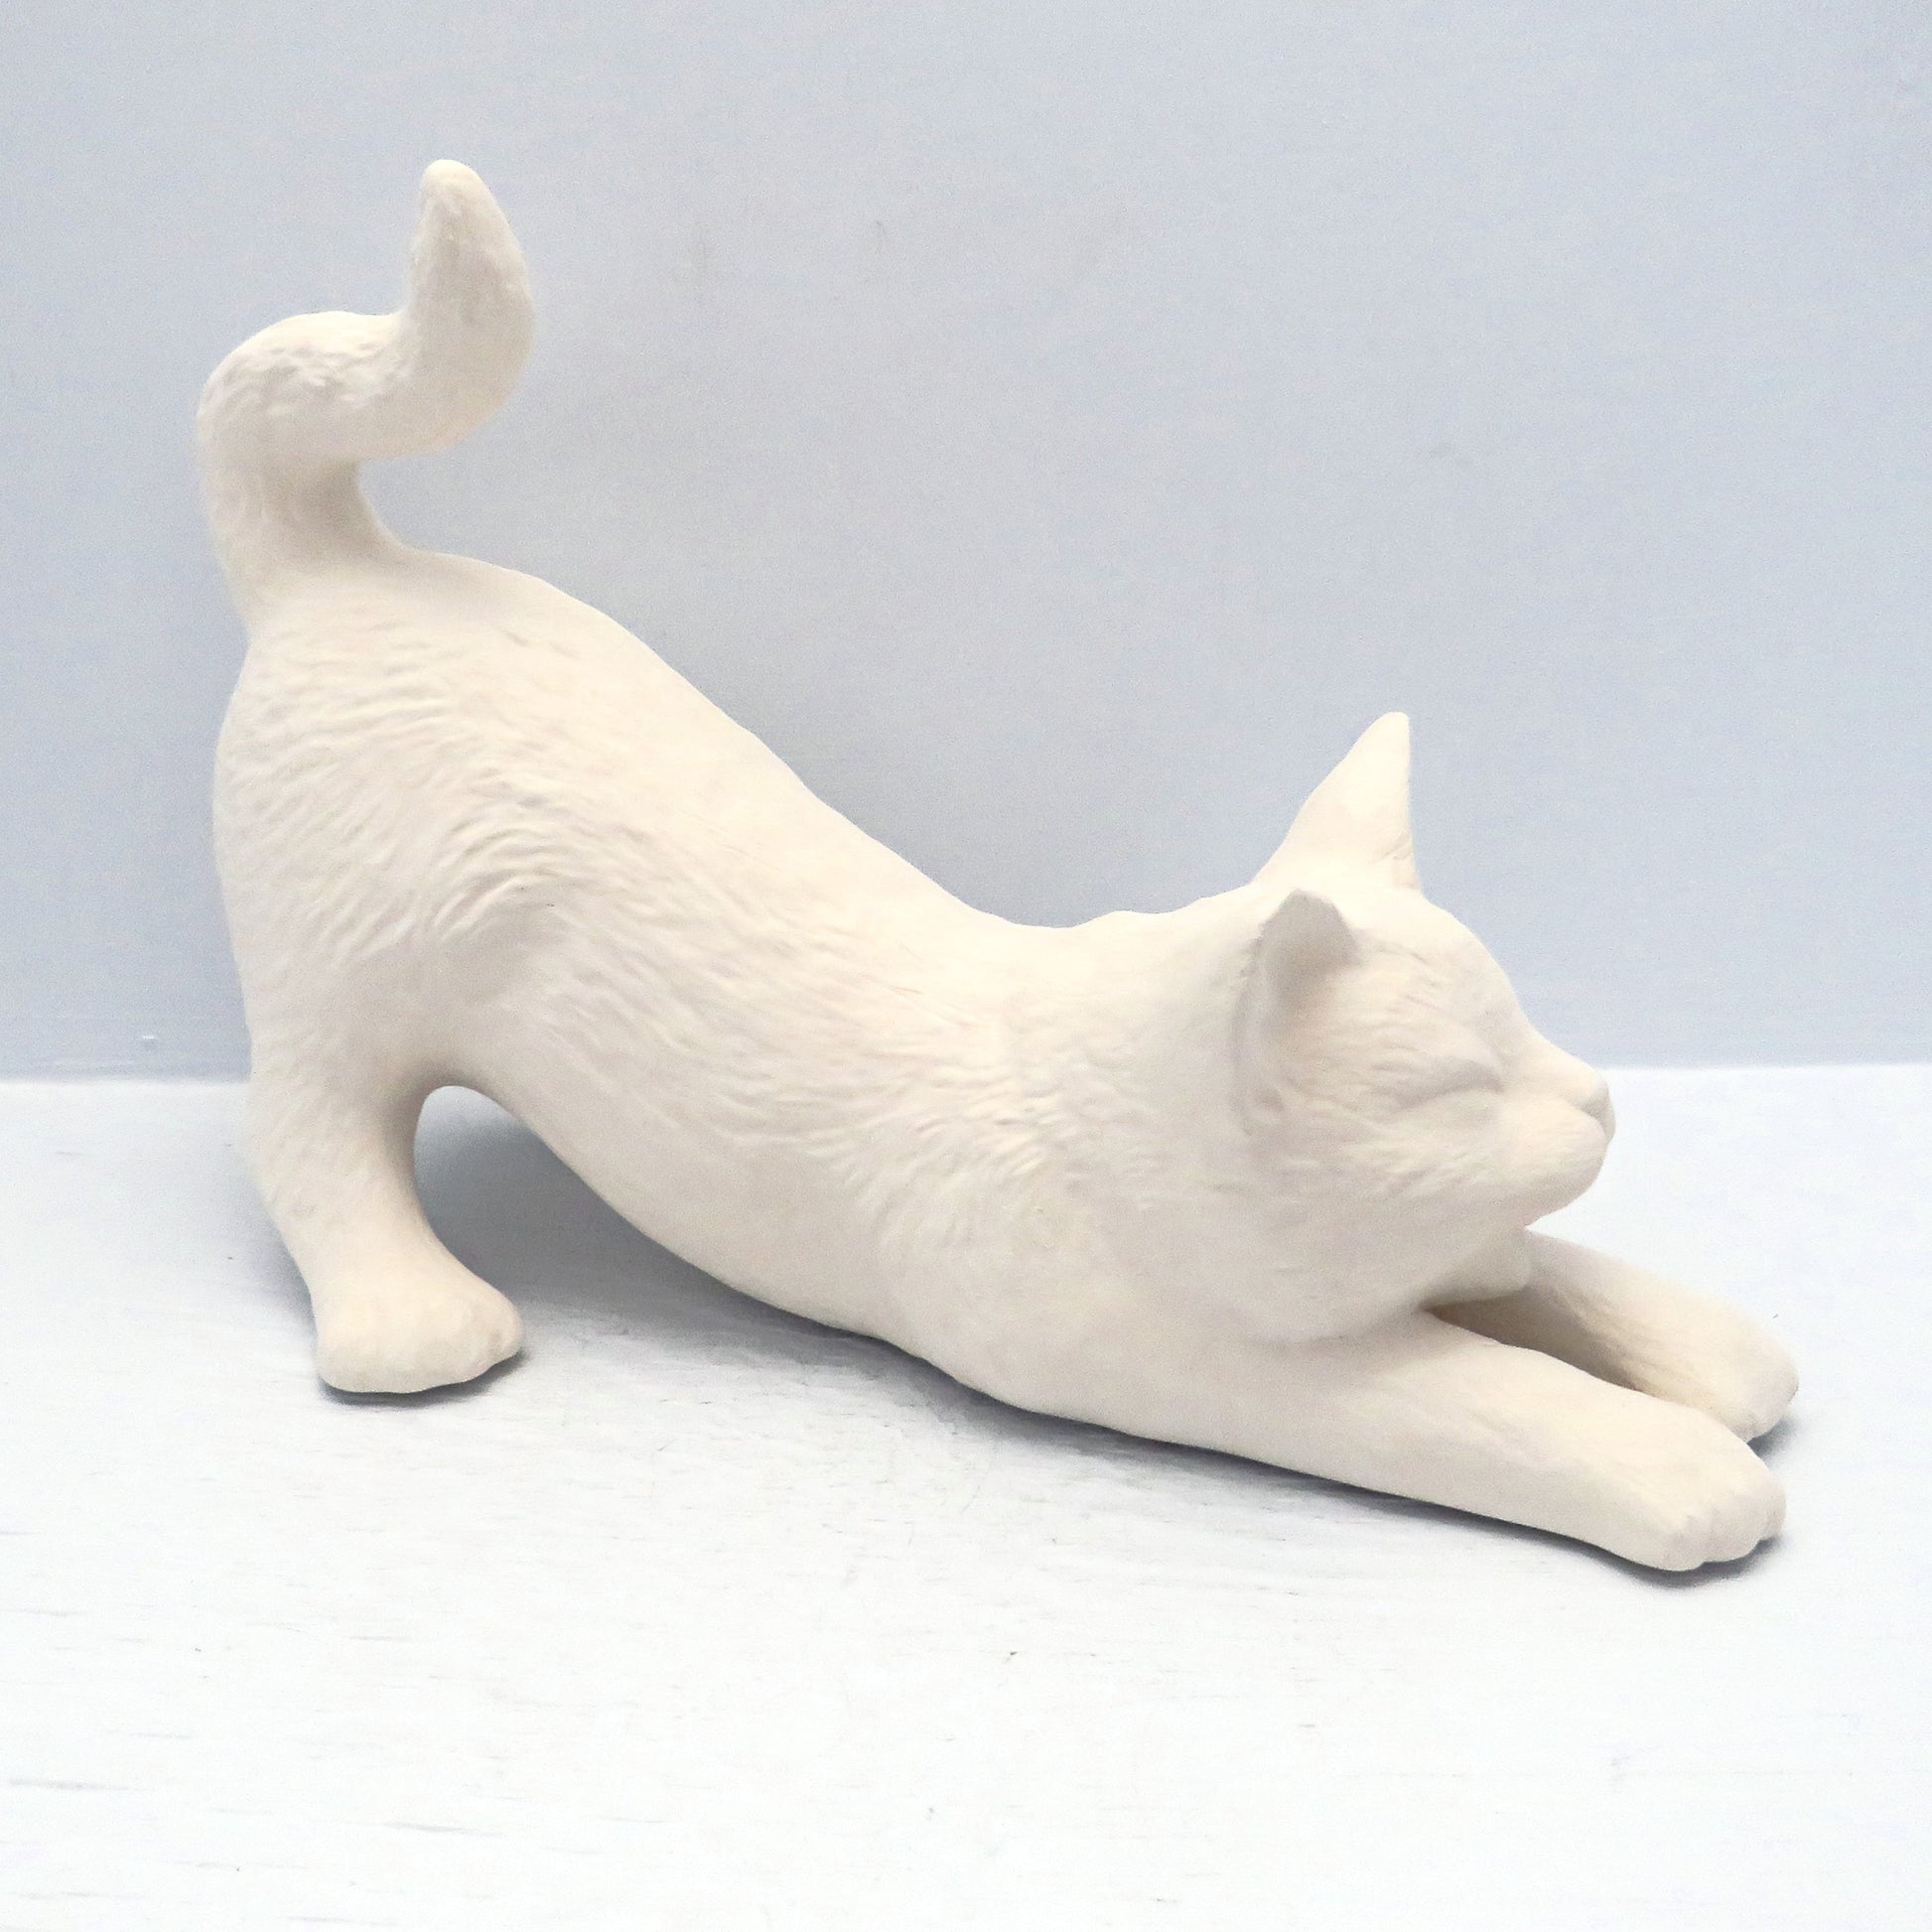 Angle view of ready to paint ceramic stretching cat on a pale blue background.  The tale and rear of the cat are up, the head is down and the front legs are stretched forward.